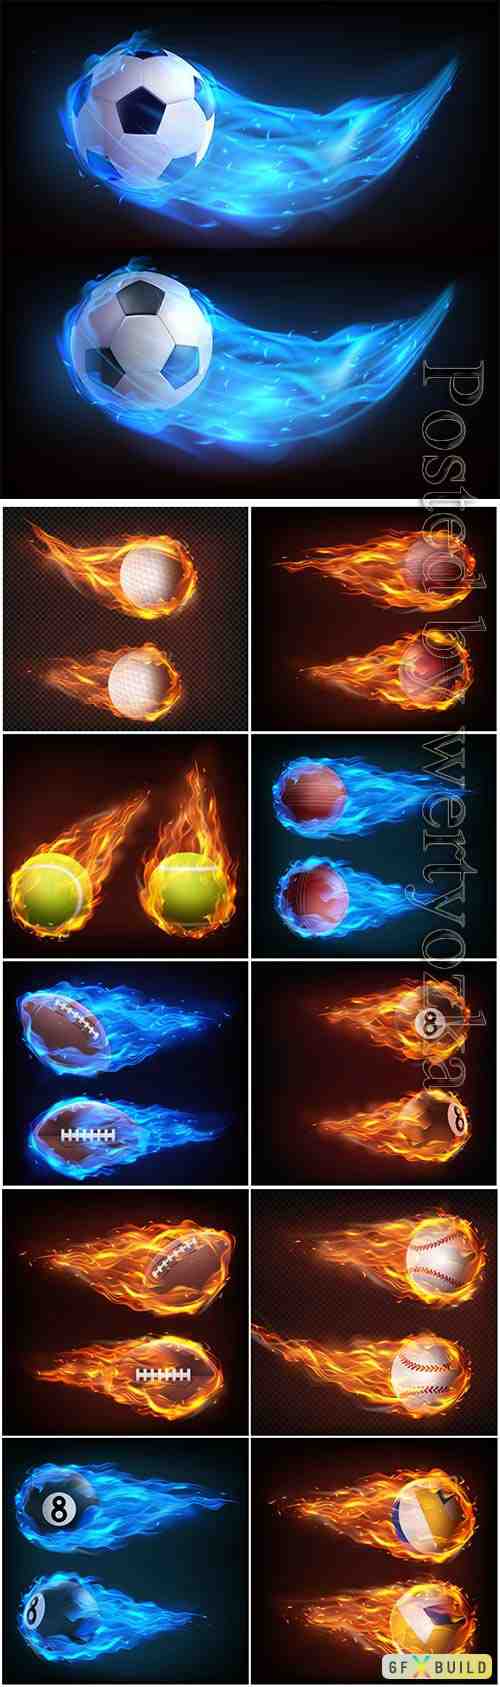 Balls flying in fire realistic vector